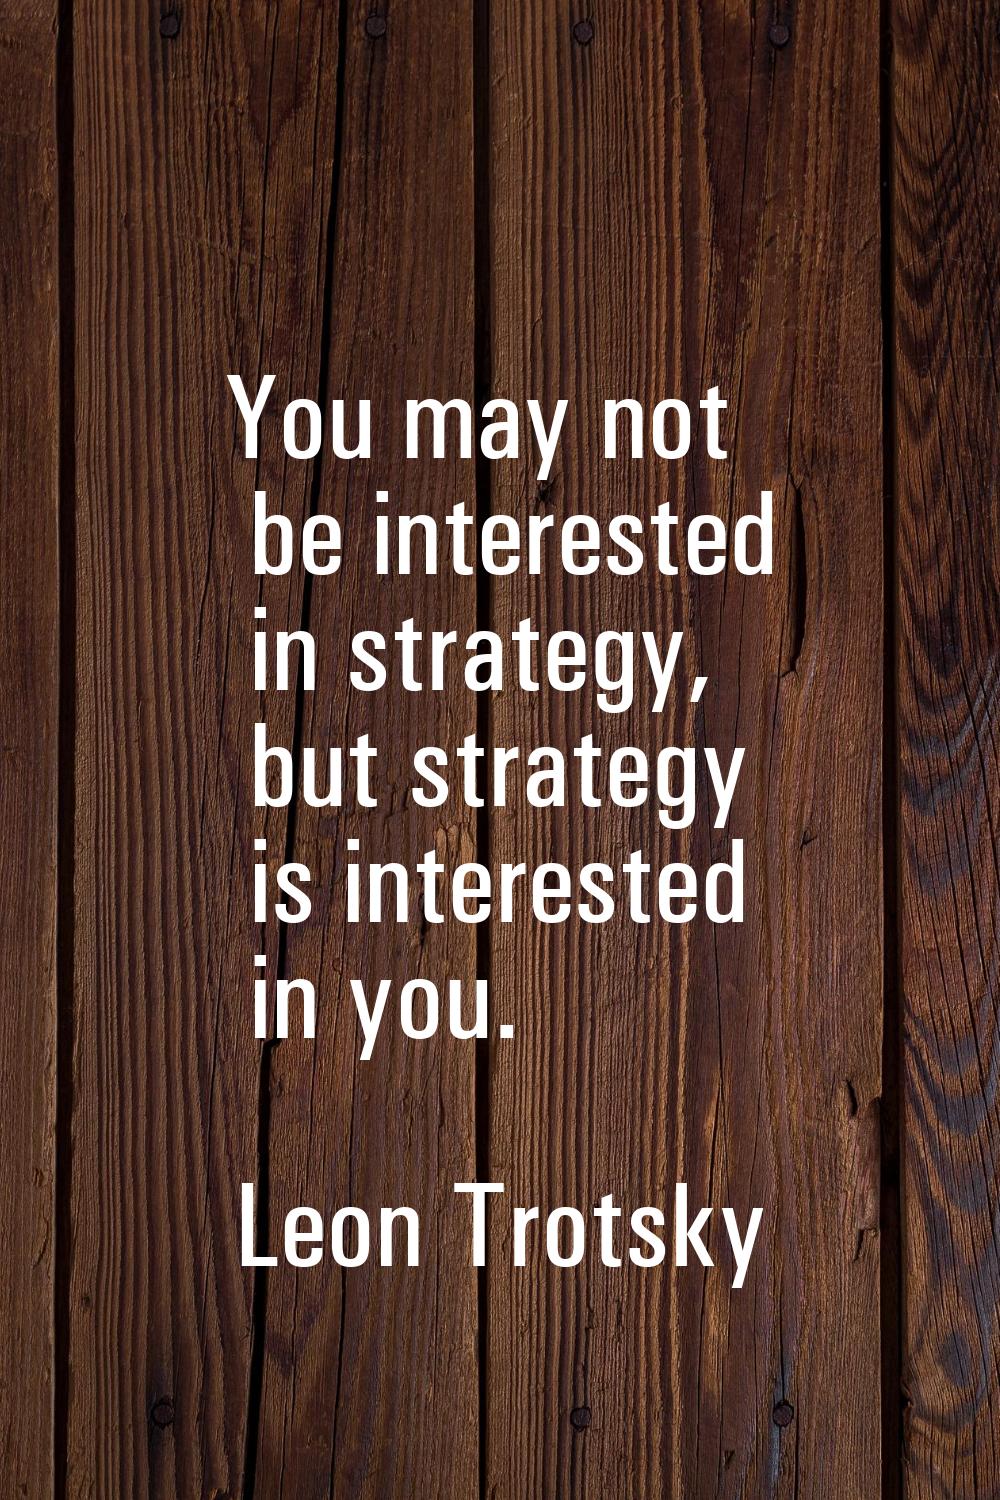 You may not be interested in strategy, but strategy is interested in you.